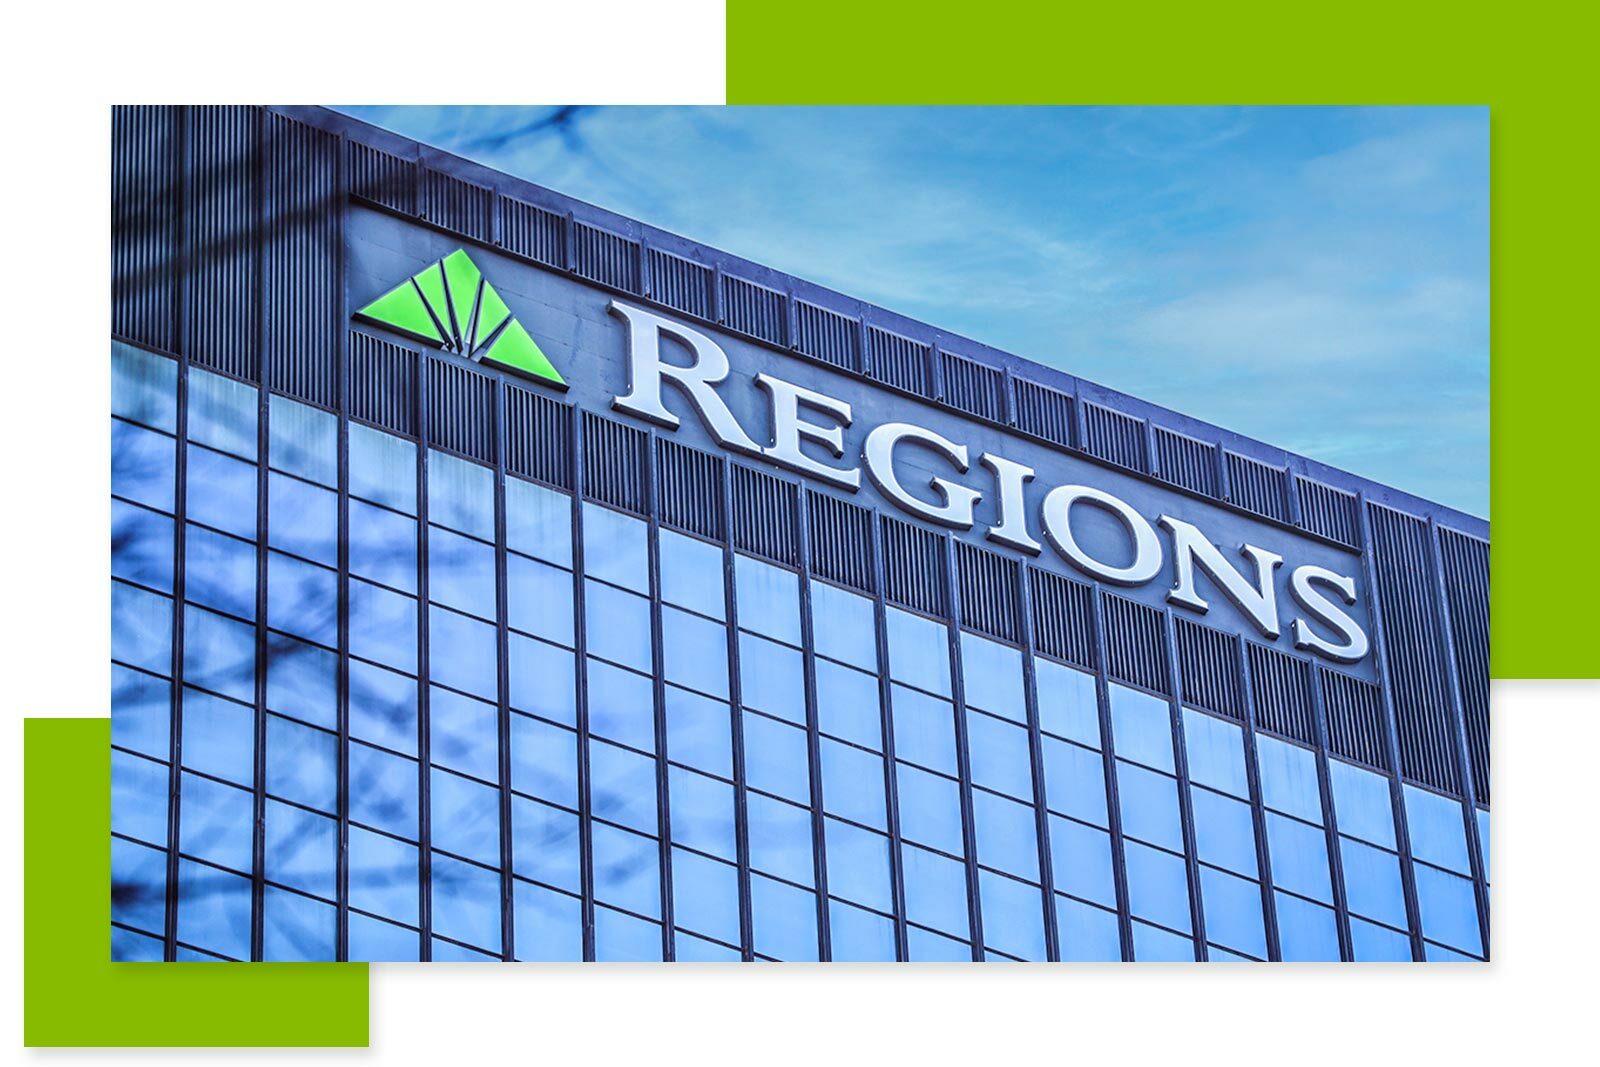 Closeup of Regions logo on the building